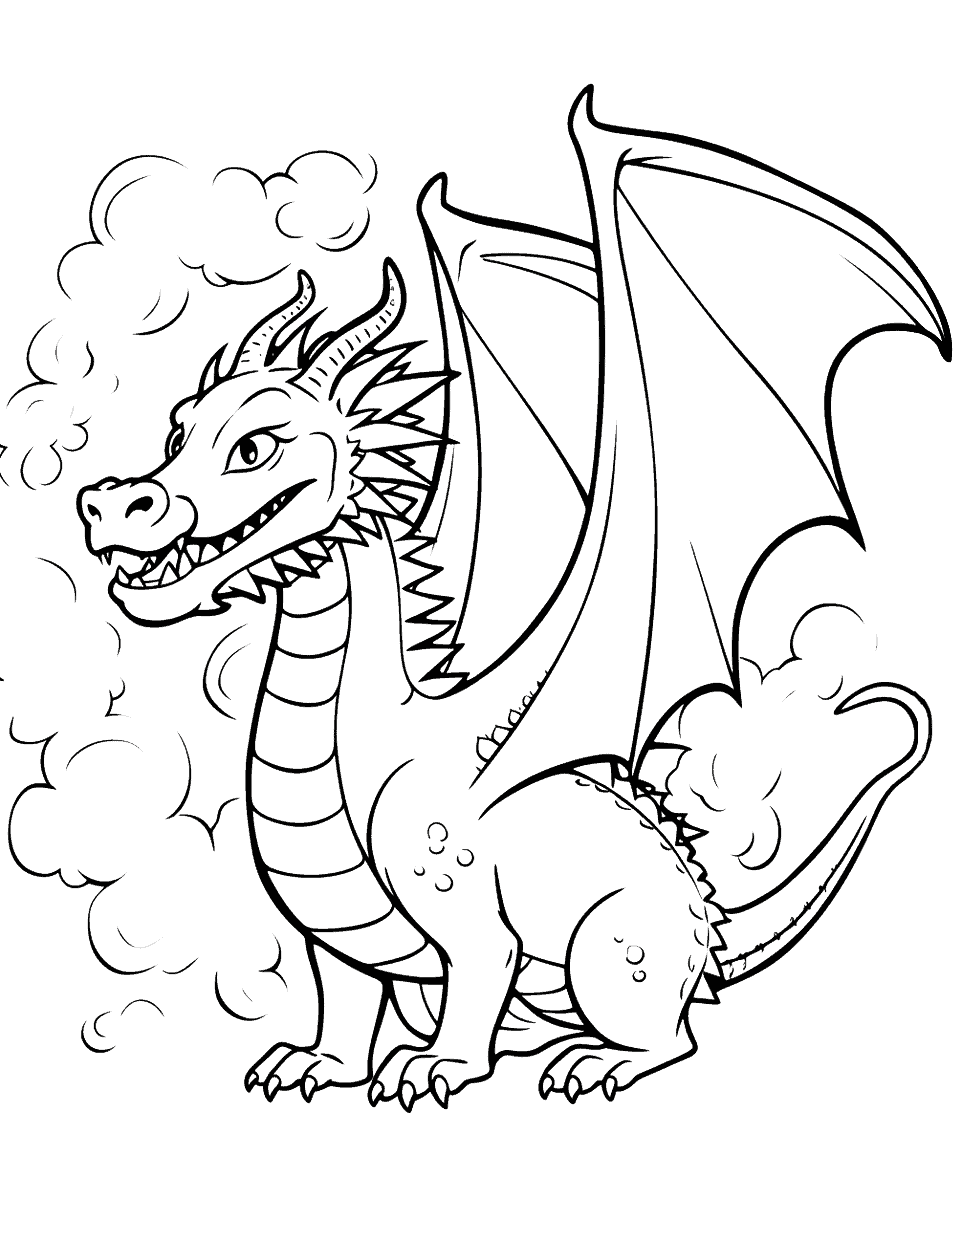 Fire-breathing Dragon Coloring Page - A fire-breathing dragon, setting ablaze the sky.